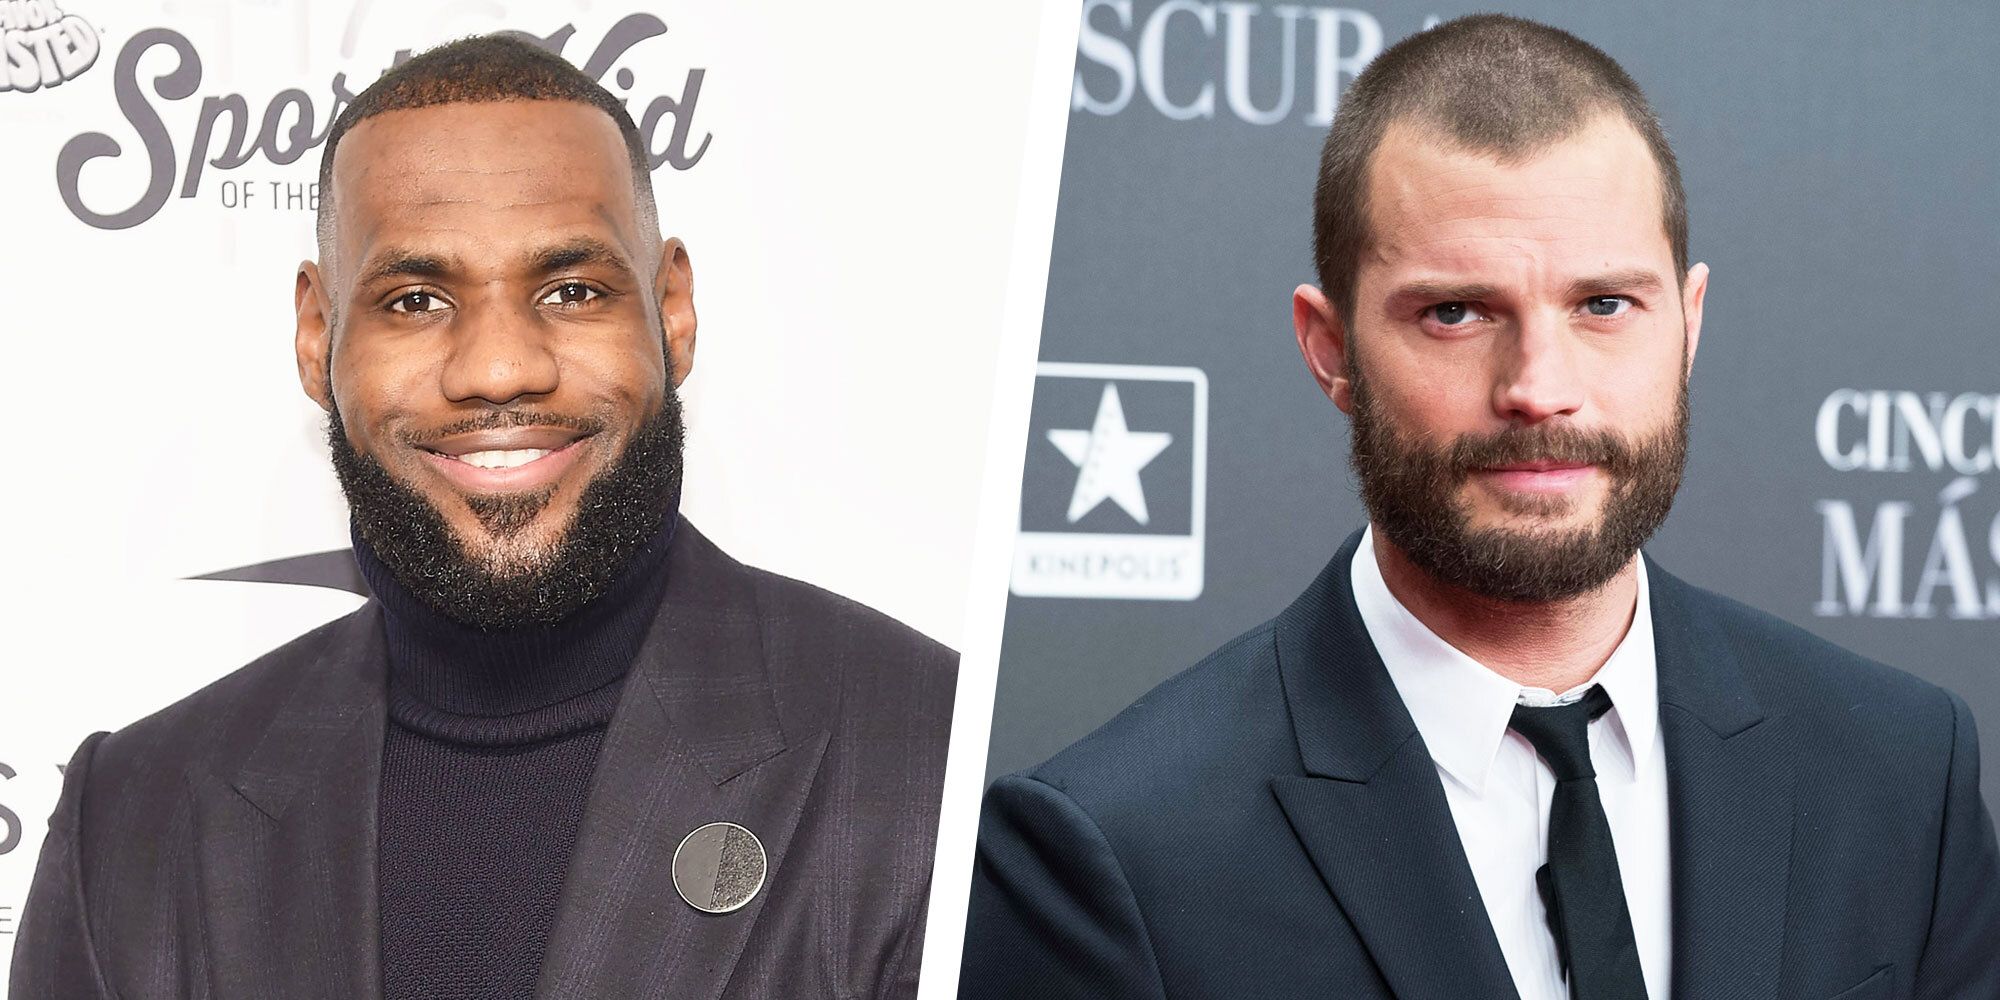 19 Best Short Hairstyles For Men With Beards in 2024